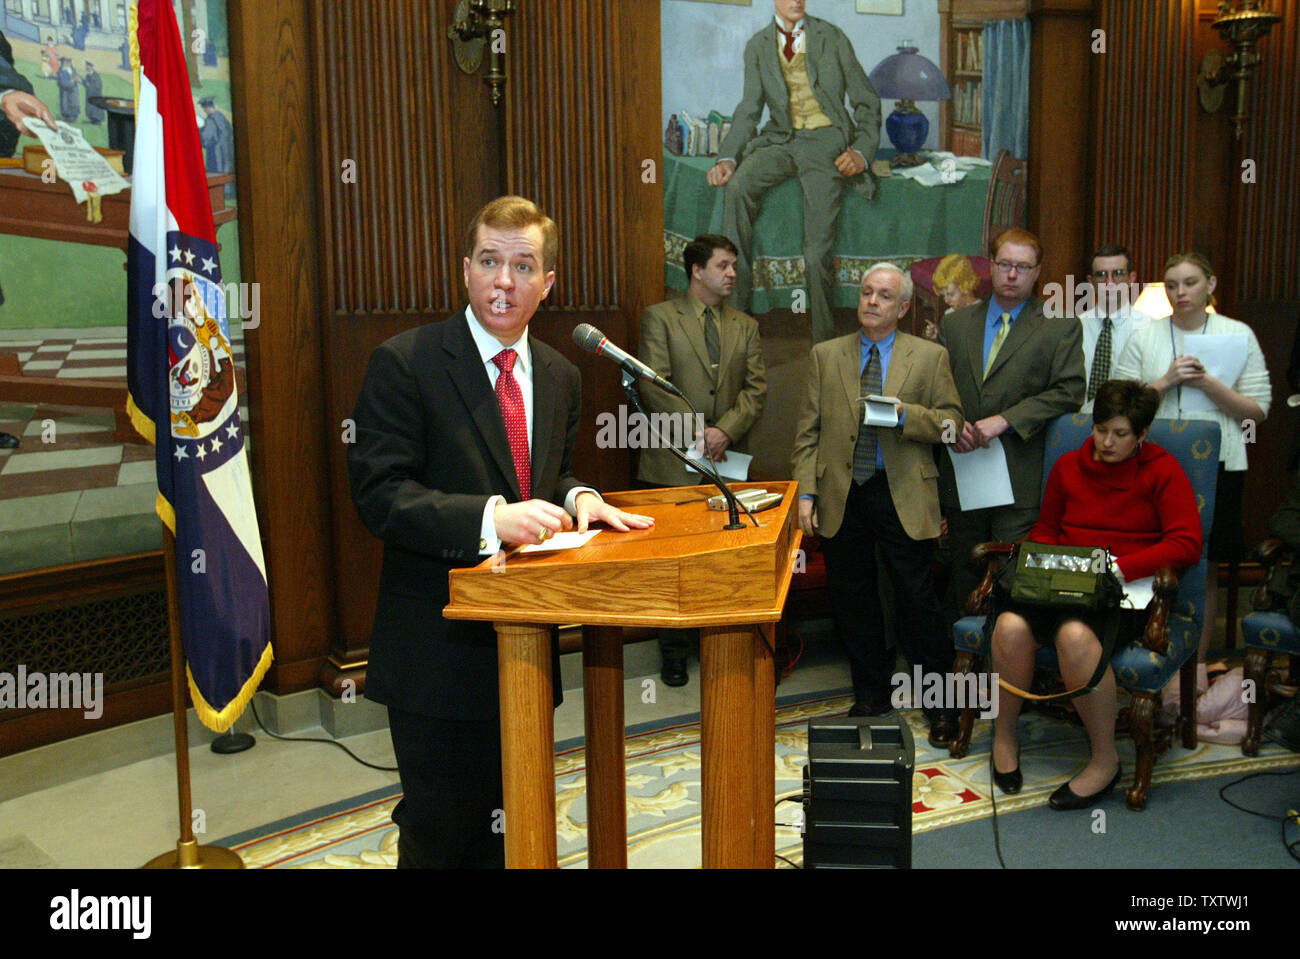 Mo. Gov. Matt Blunt answers a reporters question on his first full day at work in the State Capitol in Jefferson City, Mo on January 11, 2005. Blunt also announced the revocation of former Gov. Bob Holden's executive order which sanctioned collective bargaining for state agencies which sought to allow service unions to take money out of the paychecks of state workers. Blunt also announced cost-cutting measures like the closing of the state's Washington, D.C. office, a freeze on the purchase of non-emergency vehicles, cell phones and the purchase and leasing of new office space for state agenci Stock Photo